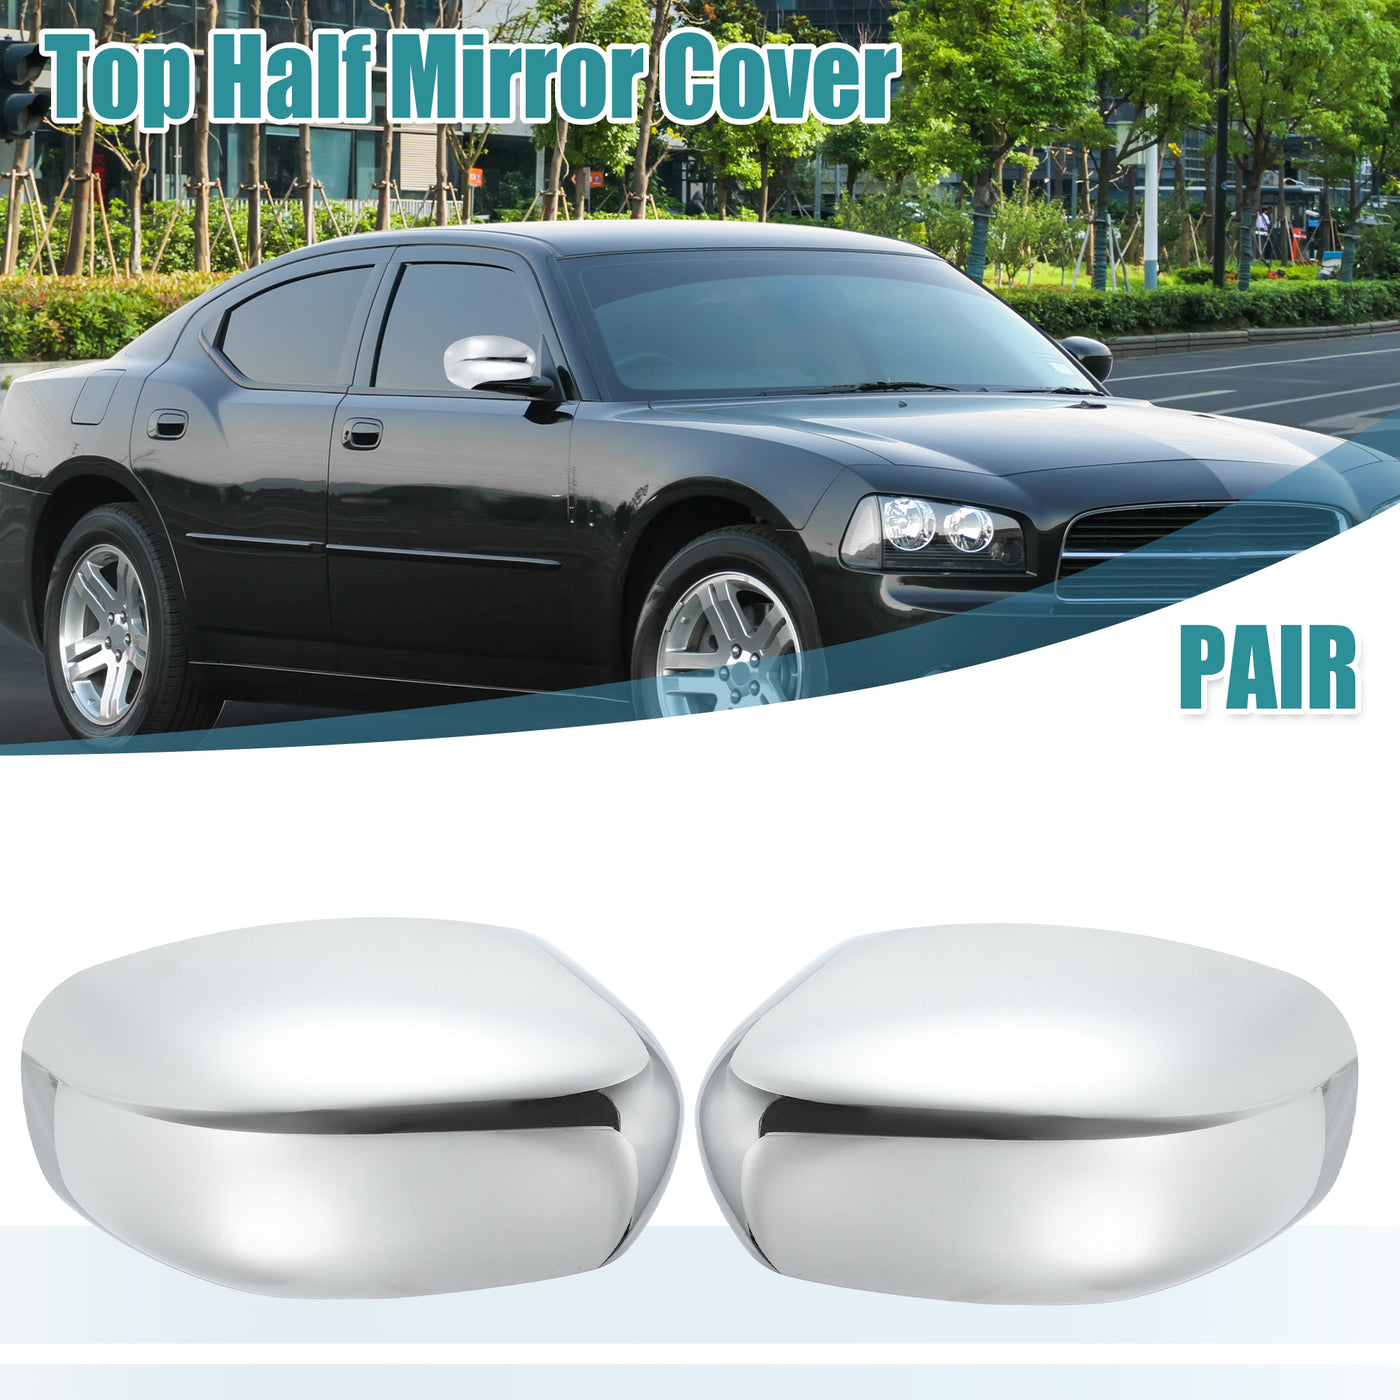 uxcell Uxcell 1 Pair Left Right Chrome Plated Full Mirror Cover for Dodge Charger 2006-2010 for Chrysler 300/300C 2005-2010 for Dodge Magnum 2005-2008